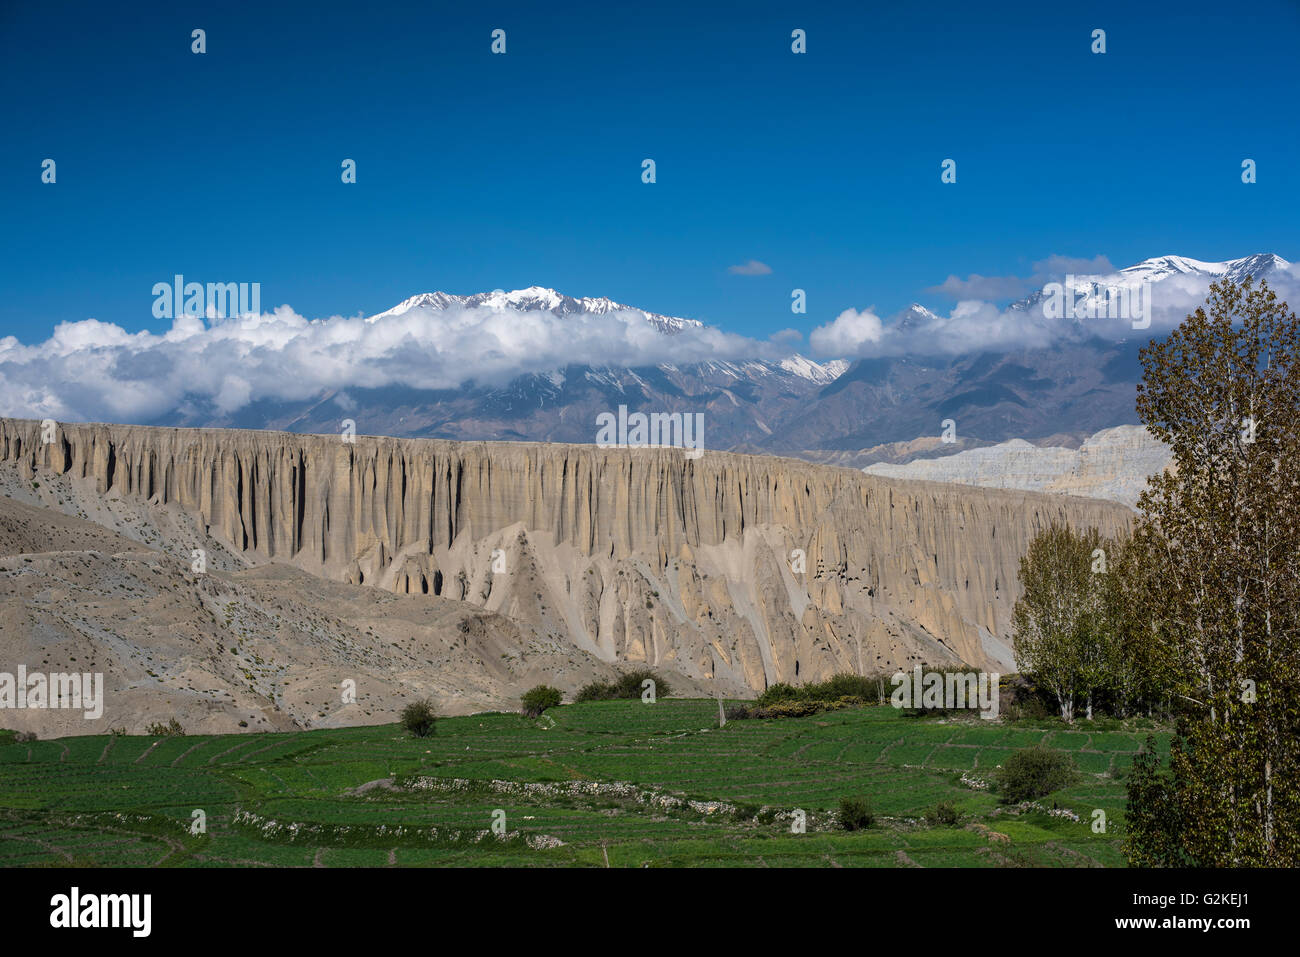 Snowy mountains, mountain scenery, eroded landscape and green fields near Yara, Kingdom of Mustang, Upper Mustang, Himalaya Stock Photo